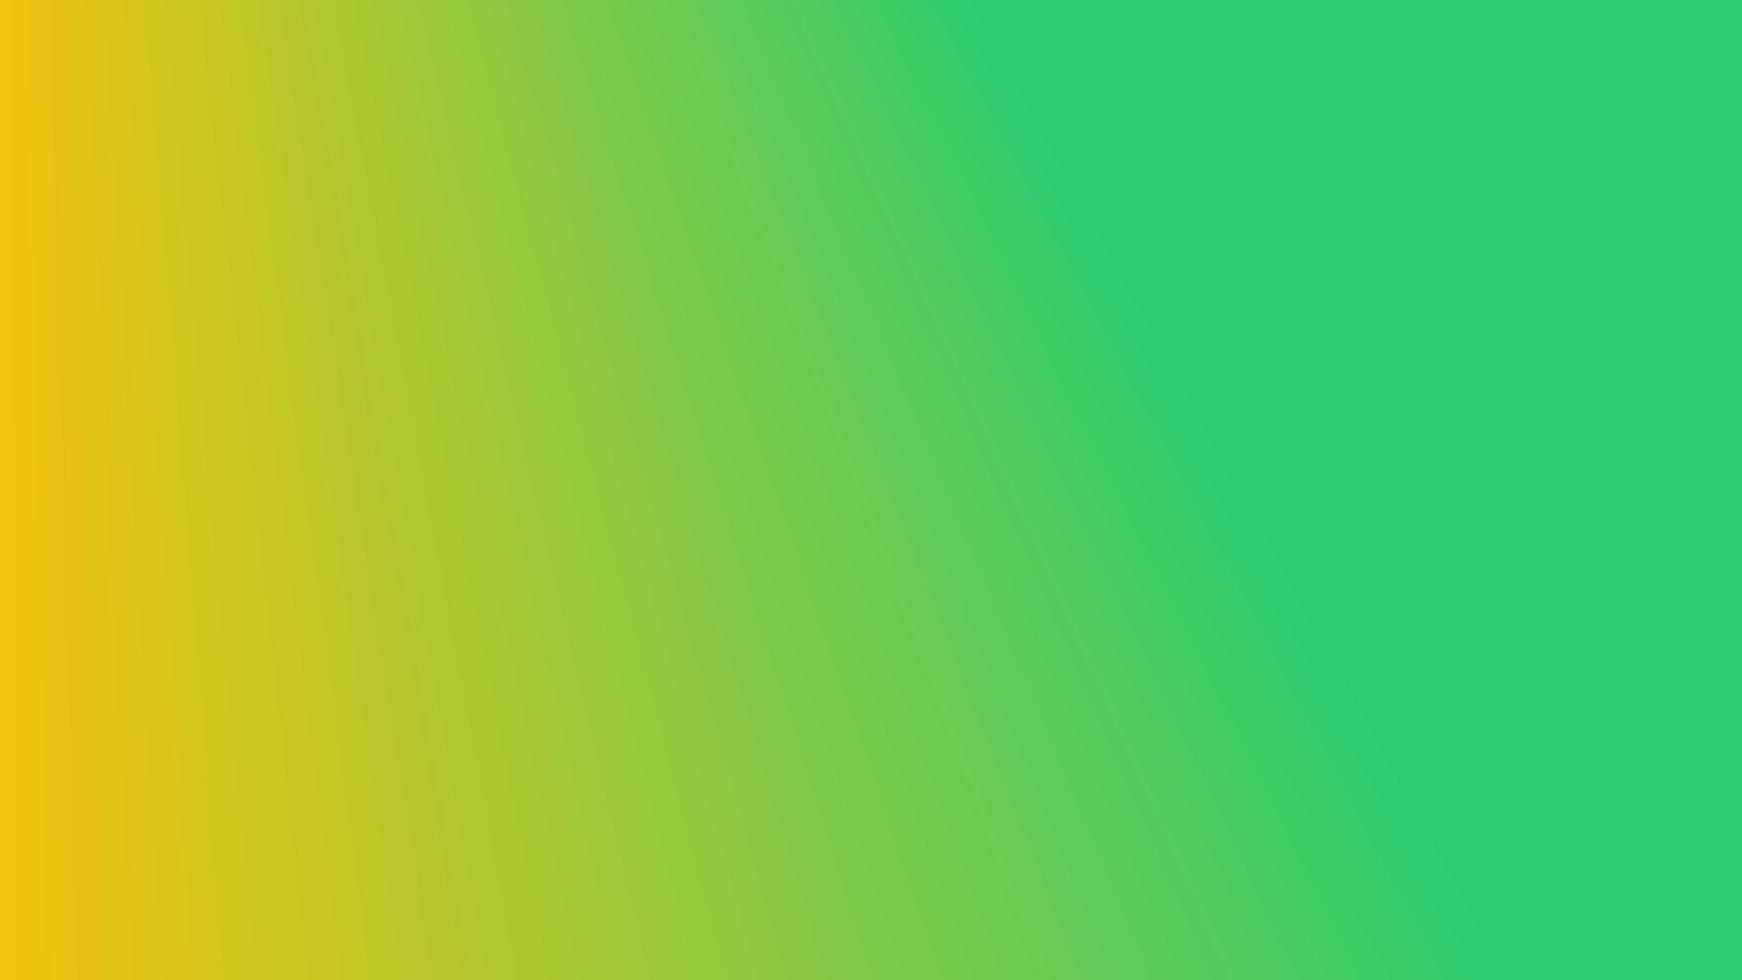 Abstract yellow and green background. Nature gradient backdrop. Vector illustration. Ecology concept for your graphic design, banner or poster.